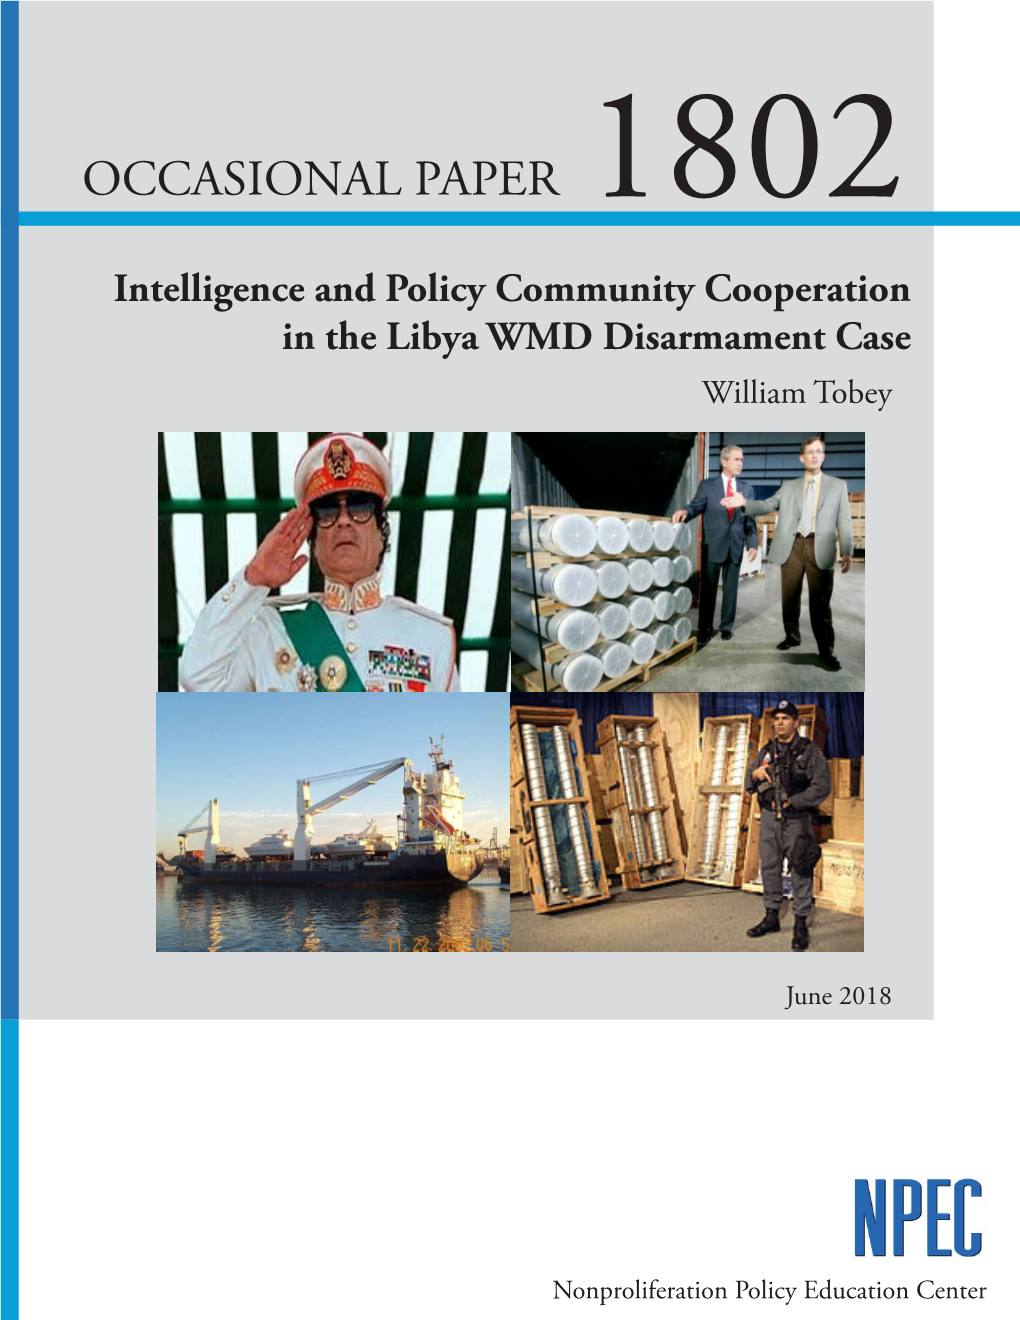 OCCASIONAL PAPER 1802 Intelligence and Policy Community Cooperation in the Libya WMD Disarmament Case William Tobey